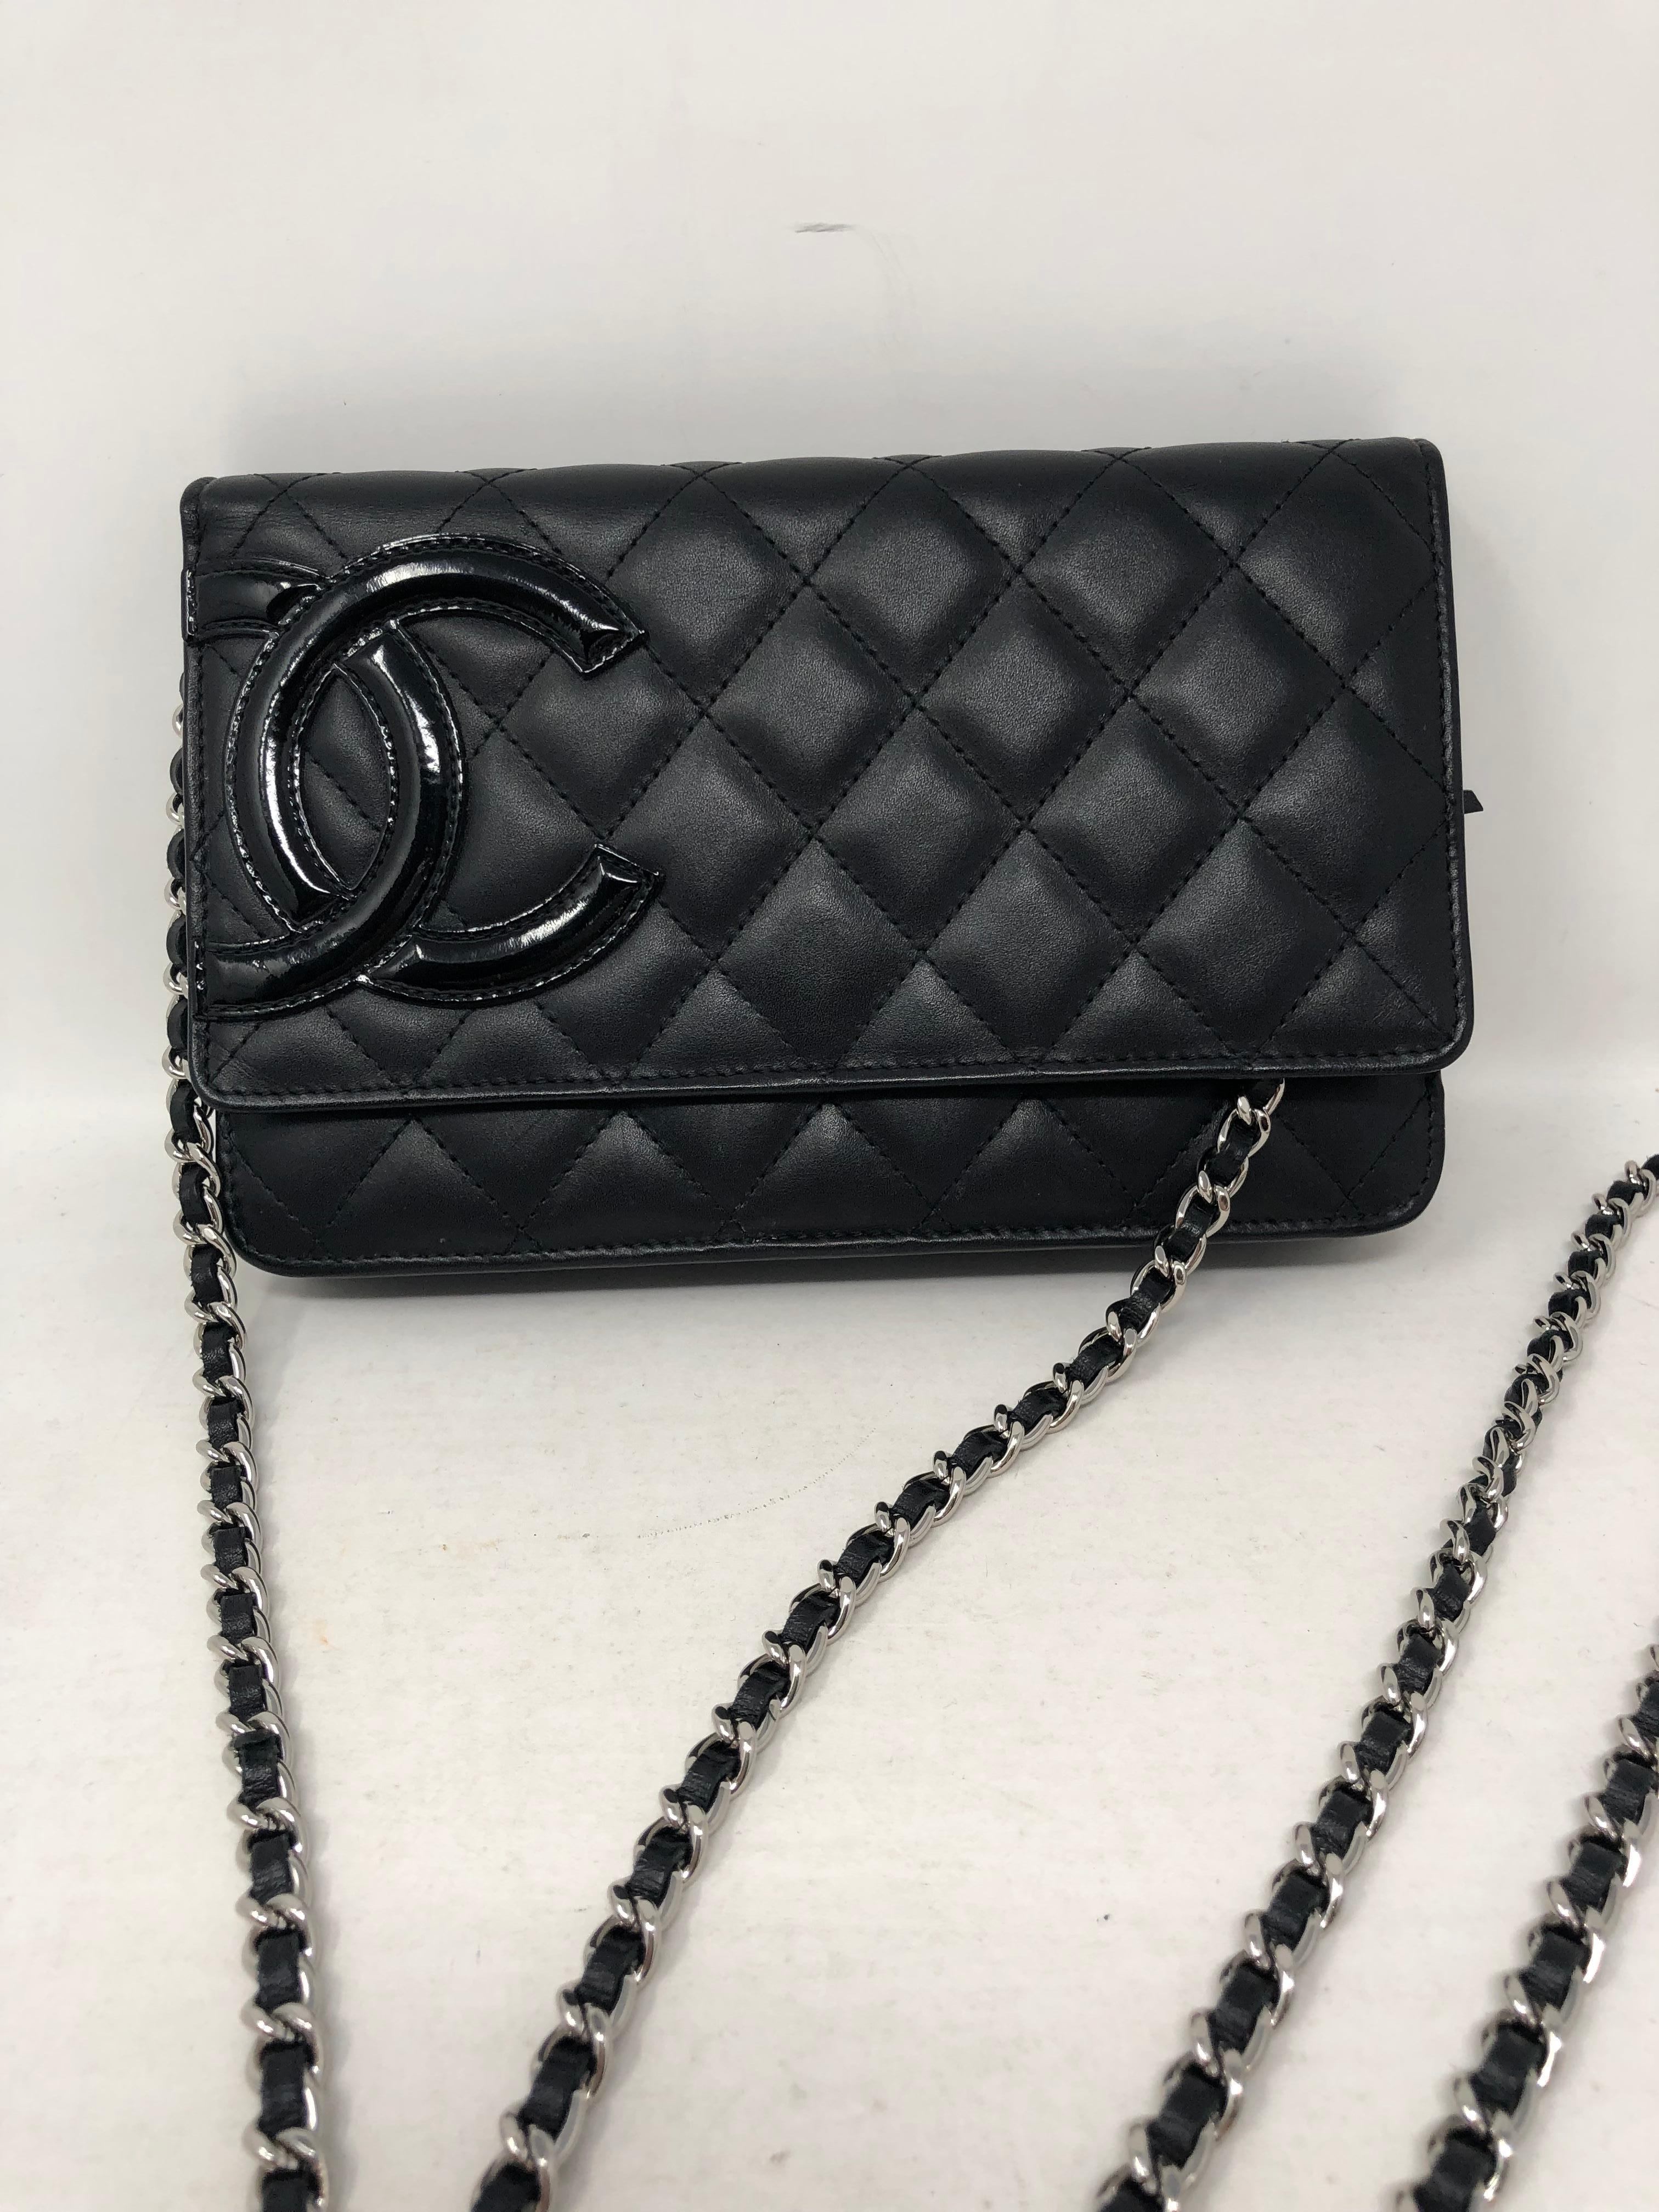 Chanel Cambon Black Wallet On A Chain. Silver hardware. Can be worn as a clutch or a crossbody. Mint condition. Guaranteed authentic. 